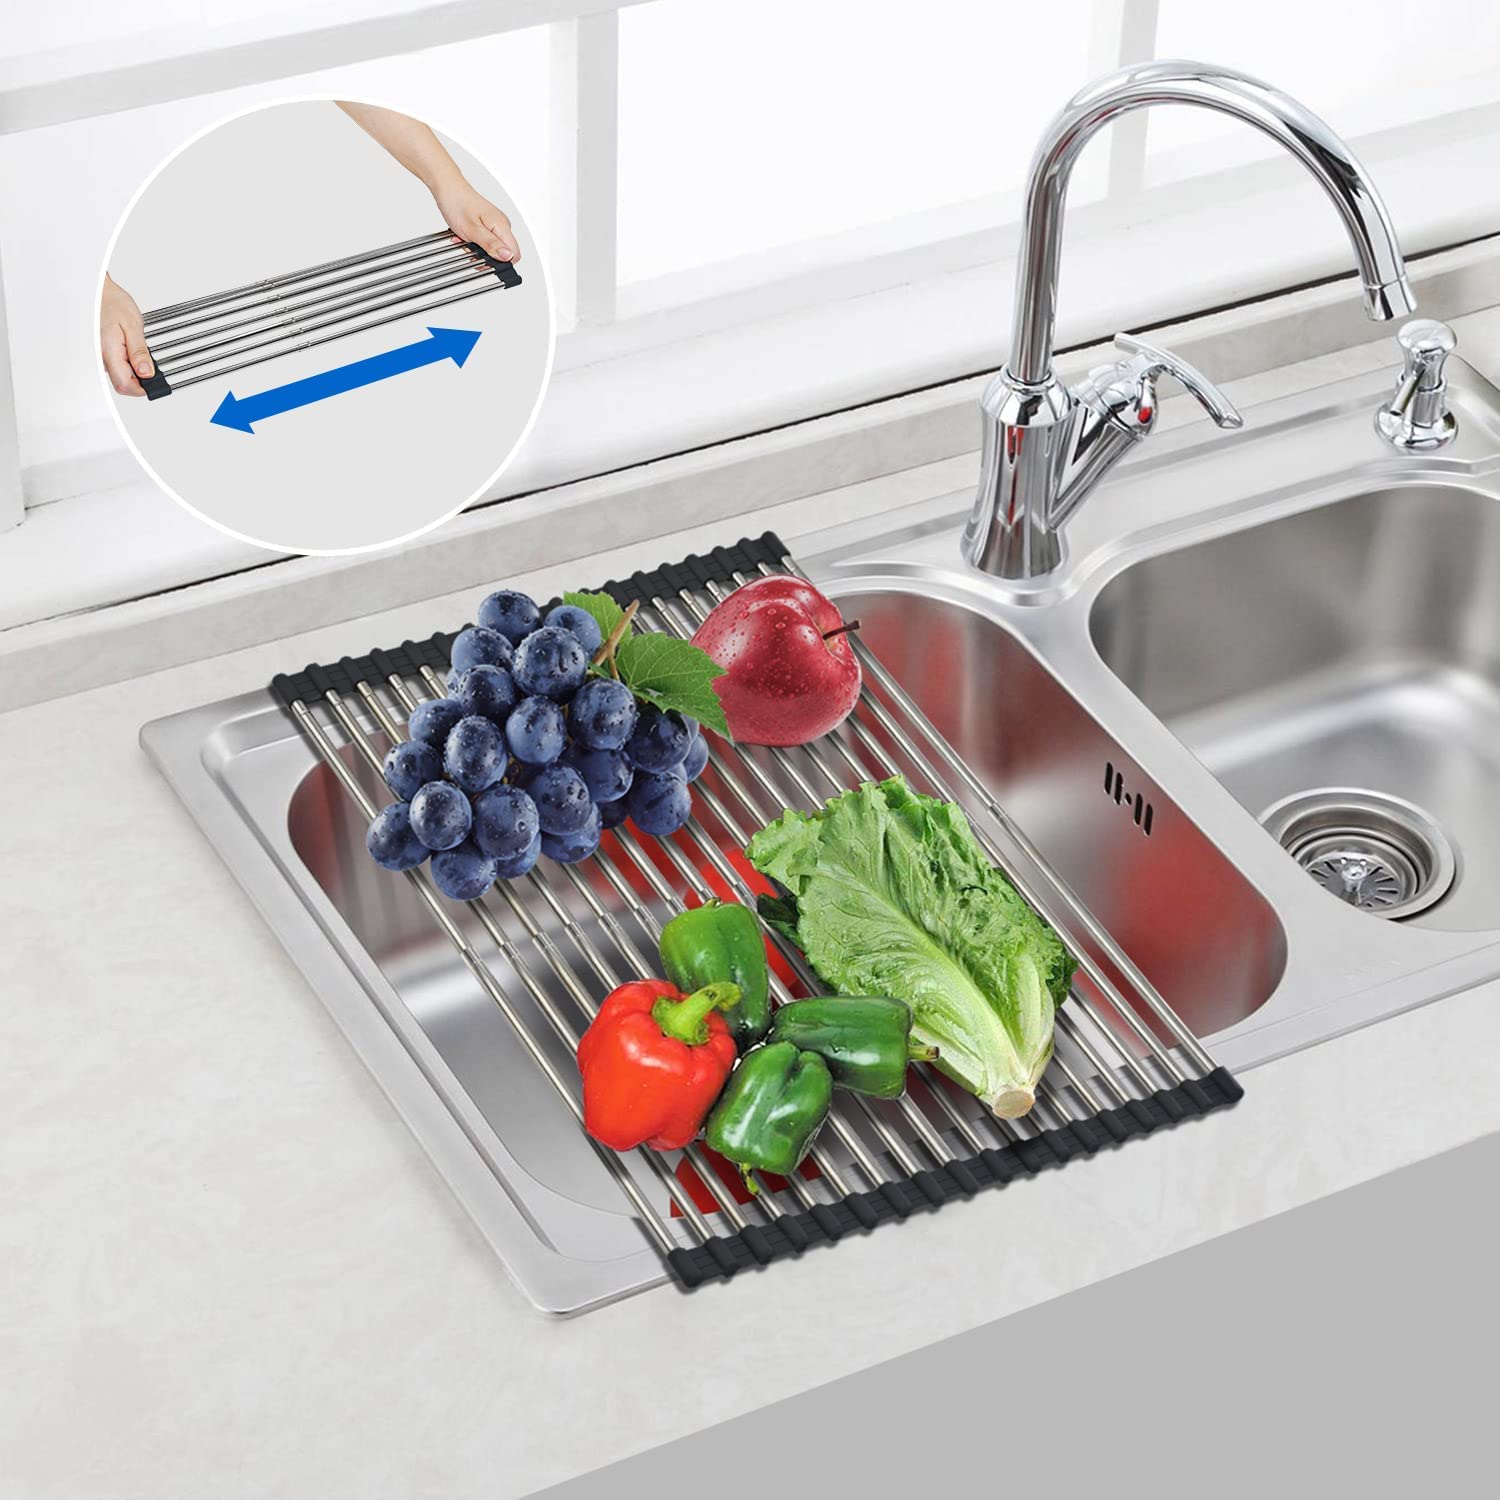 Arainy Large Telescopic Drain Rack Roll Up Dishes Drying Rack Expandable Kitchen Sink Rack Over The Sink Dish Drying Rack SUS304 Stainless Steel